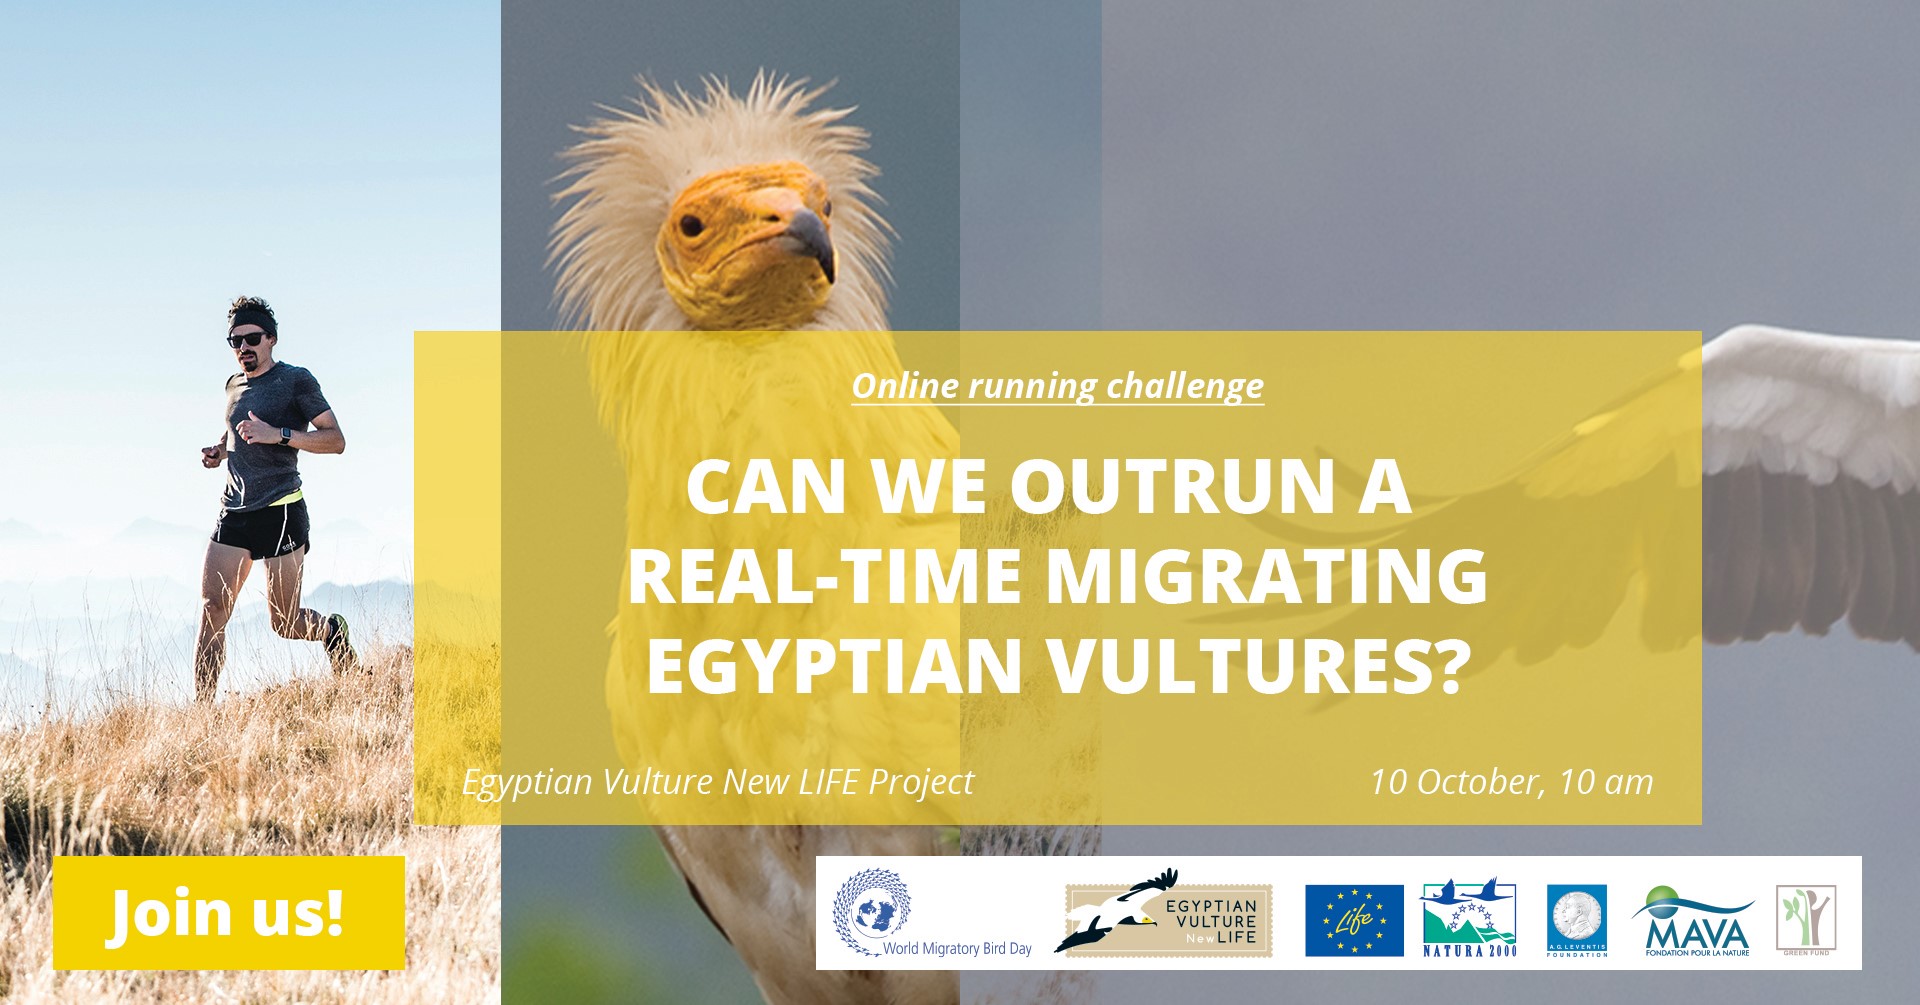 Can we outrun real-time migrating Egyptian vultures? Join us!